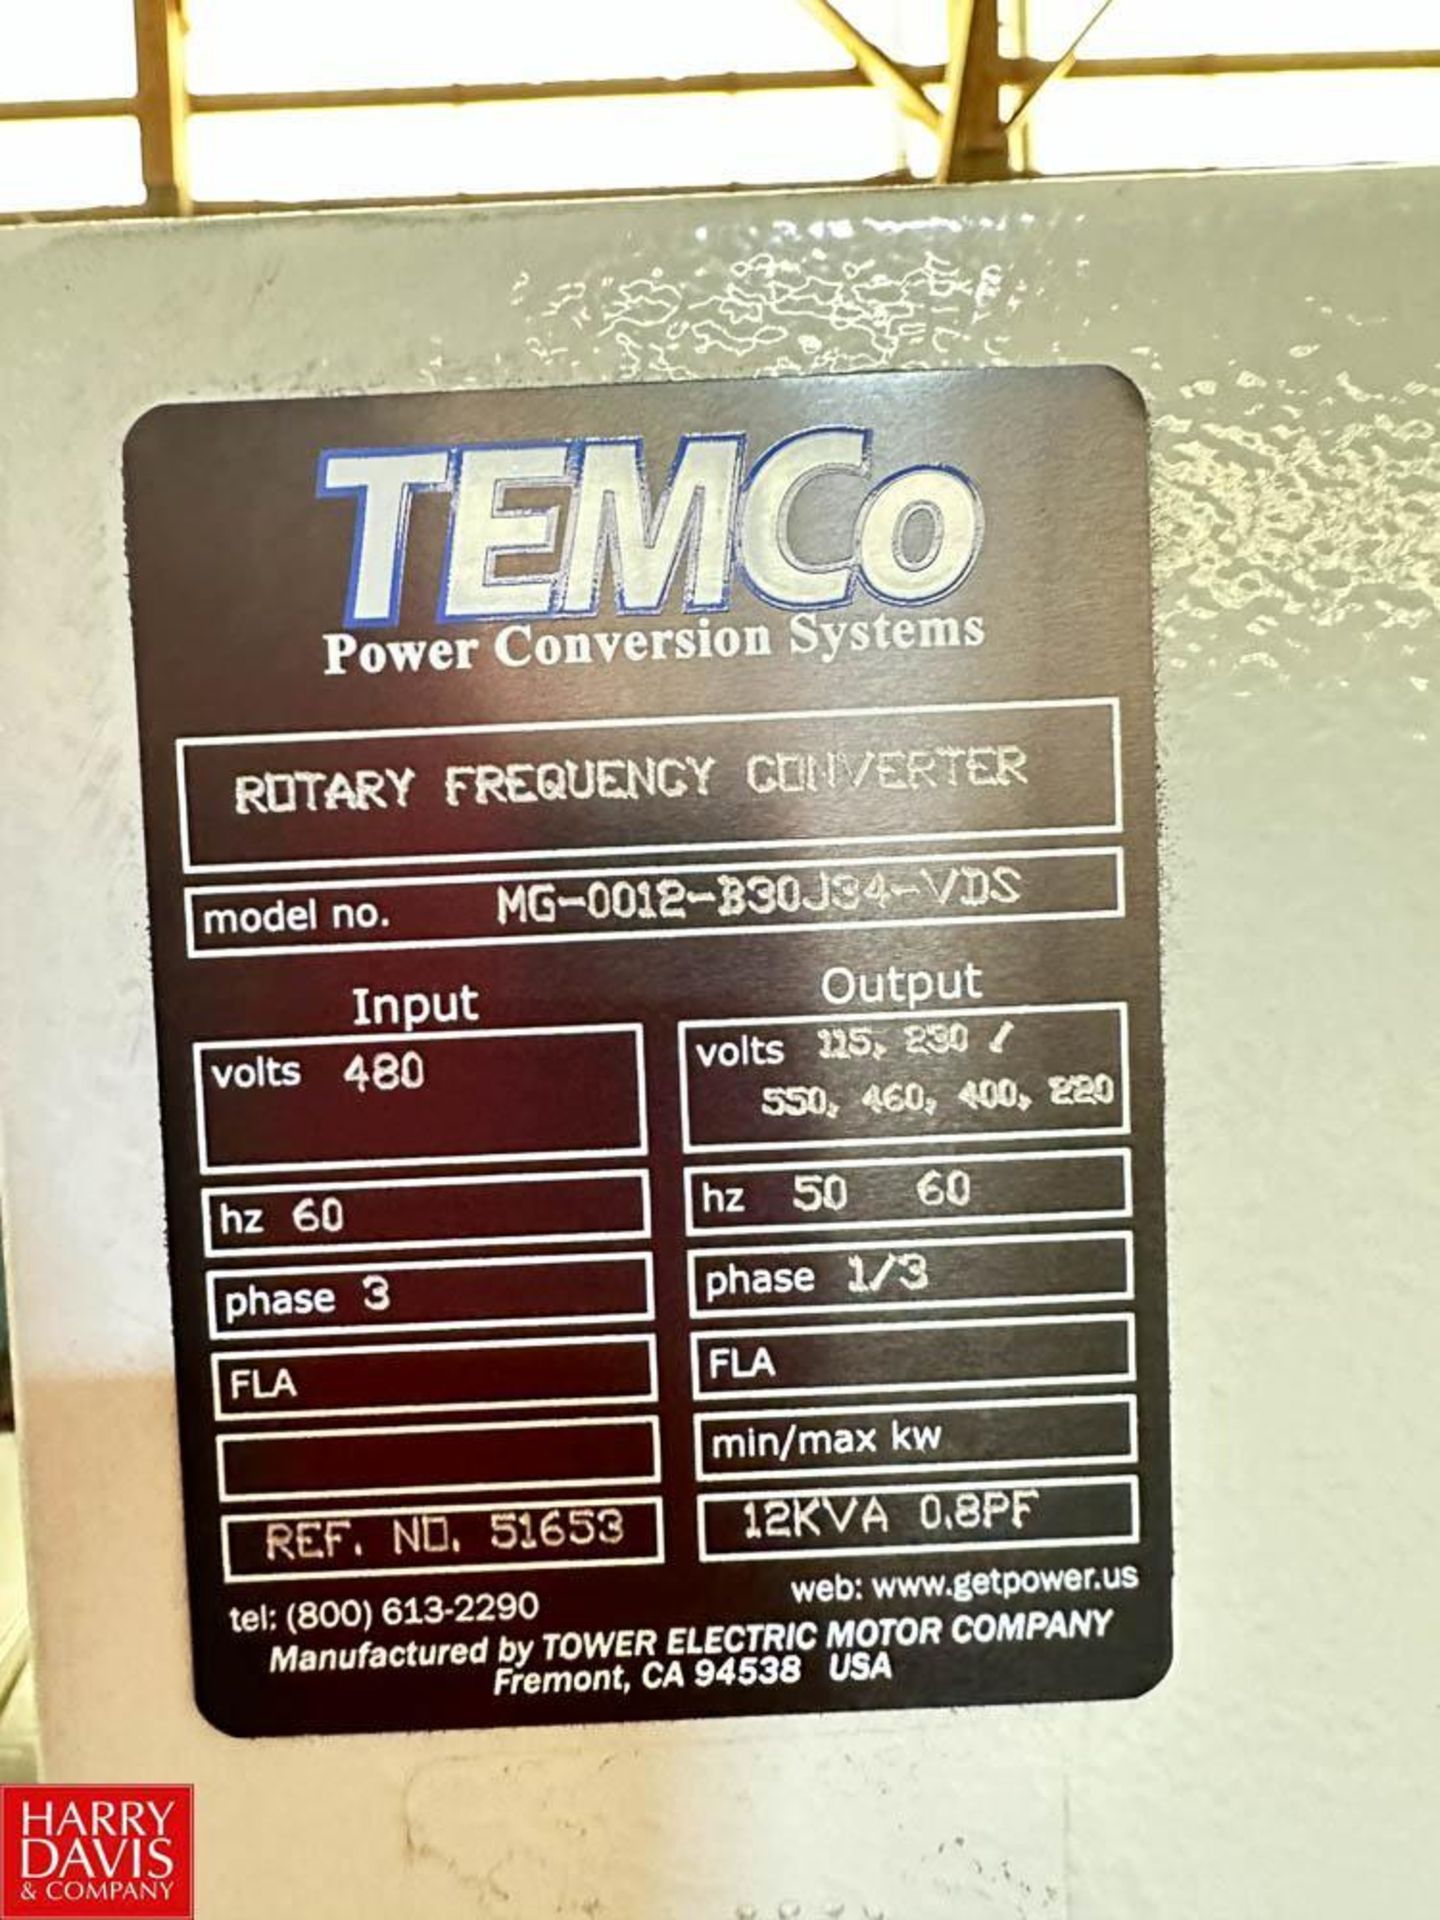 Temco Power Conversions Systems Rotary Frequency Converter, Model: MG-0012-B30534-VDS, 480 Volt Inpu - Image 2 of 3